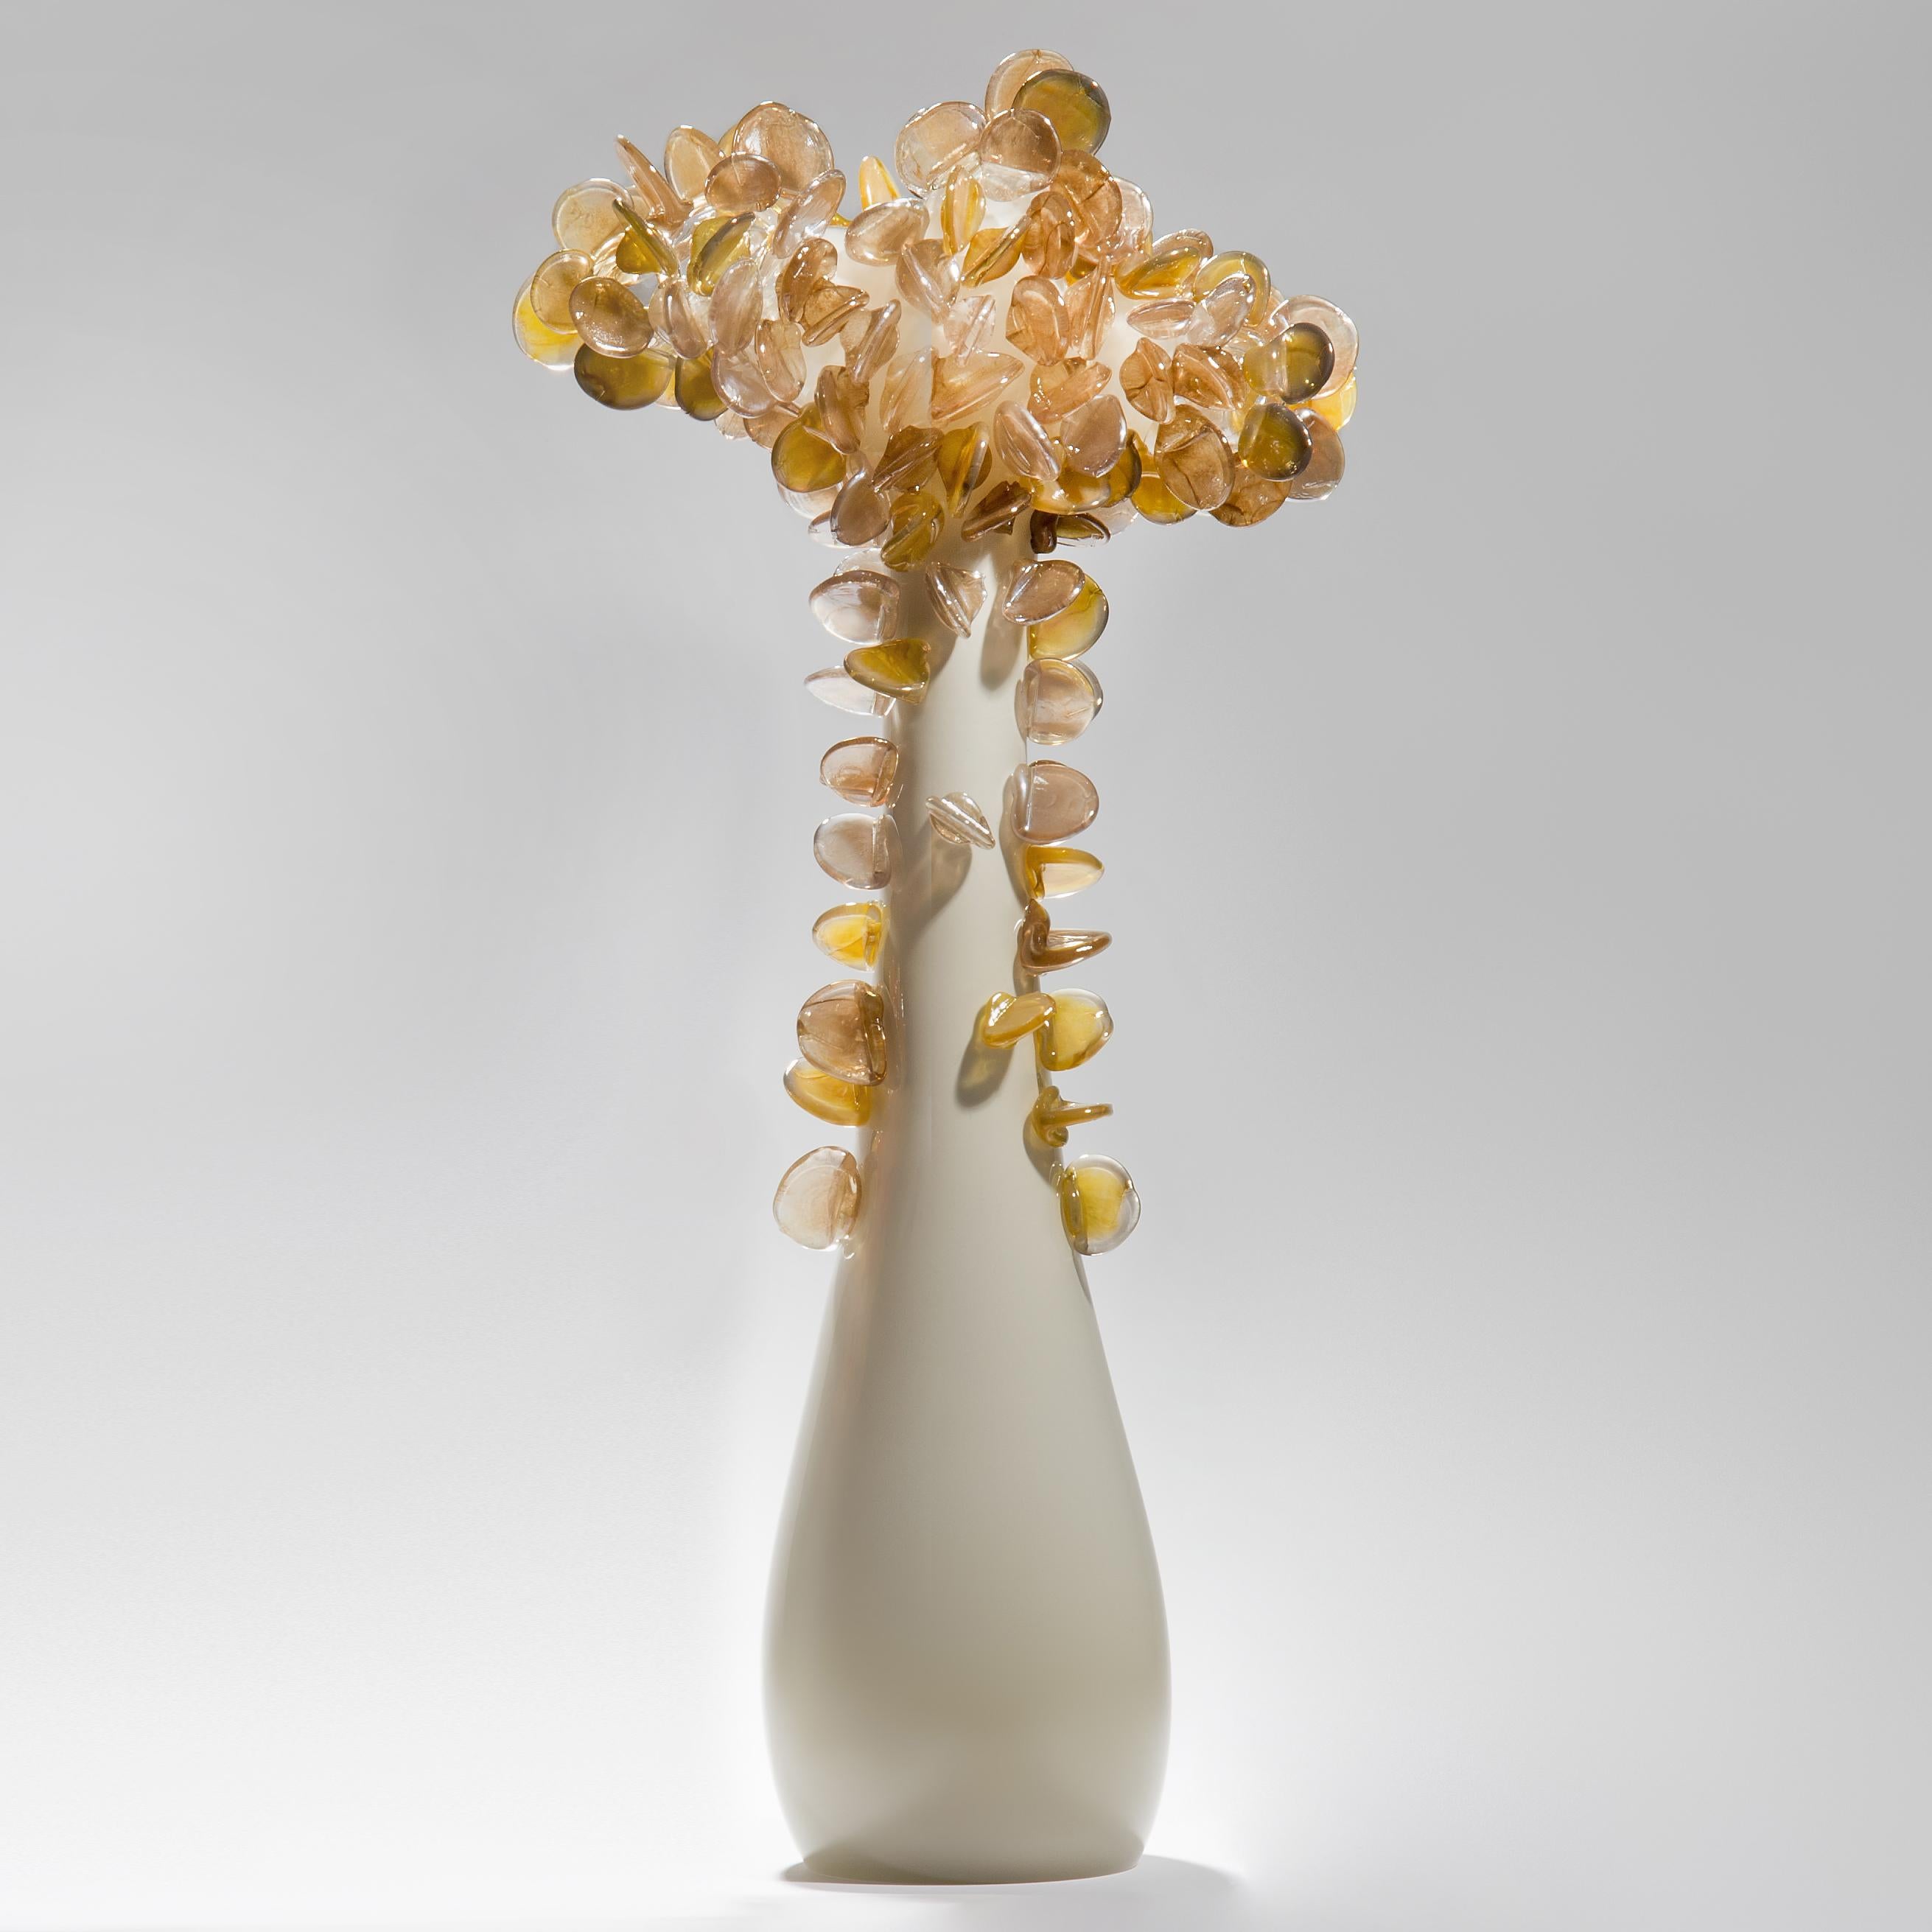 Enchanted Dusk in tall bronze, is a unique glass tree sculpture by the British artist Louis Thompson. The initial tree trunk form has been handblown in clear and taupe coloured glass. The top has been covered in free-hand sculpted leaves, each